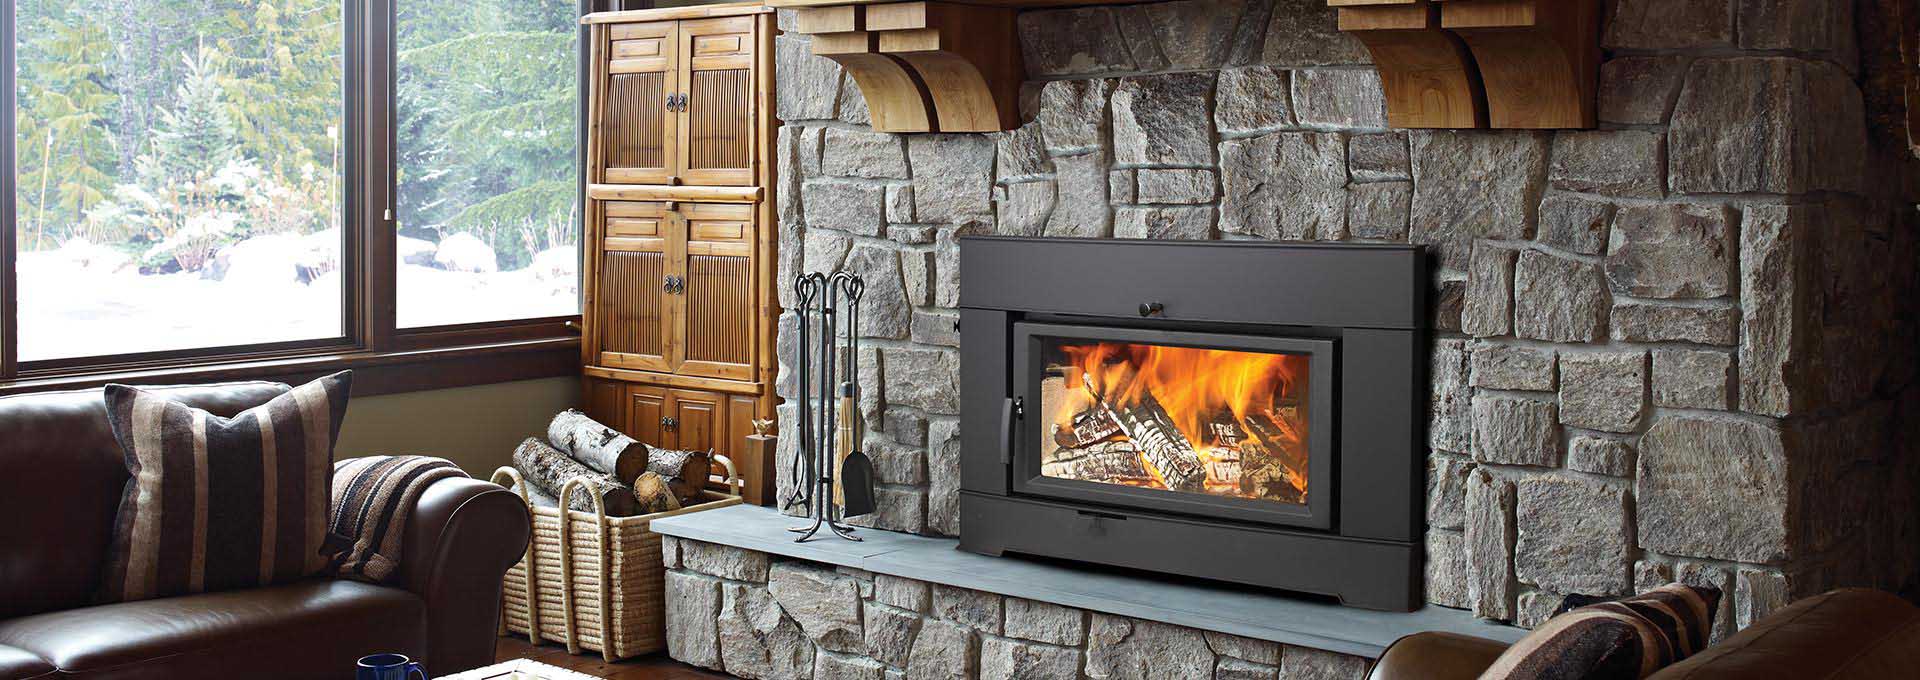 Top 5 Reasons You Should Upgrade to a Wood Fireplace Insert 